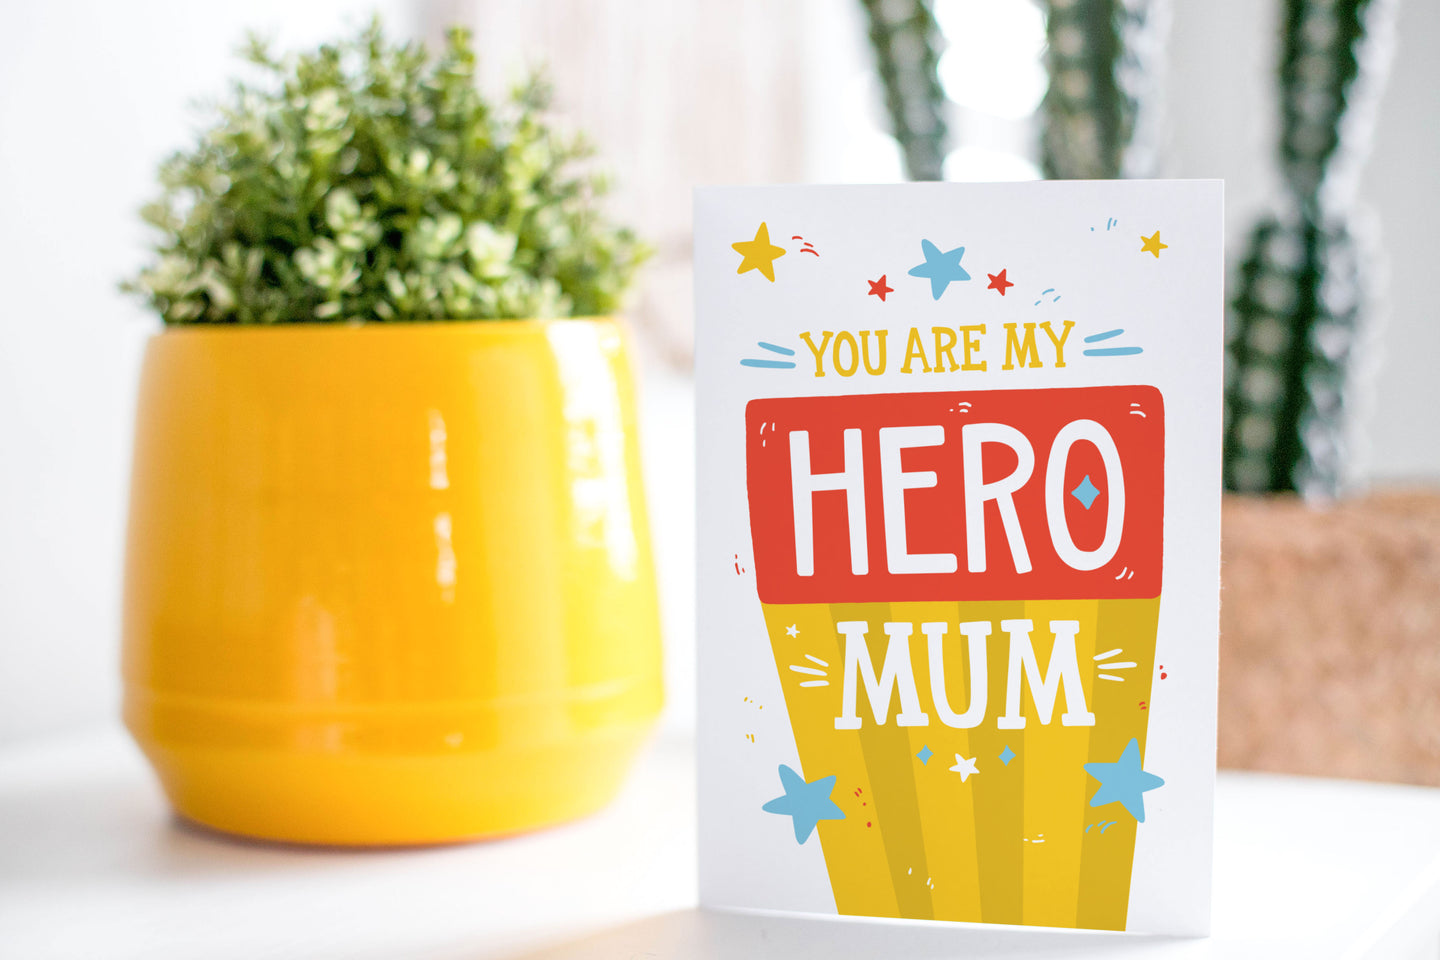 A greeting card is on a table top with a yellow plant pot and a green plant inside. The card features illustrated lettering reading “You are my hero mum” with stars around it. There’s a background behind the word “mum” featuring yellow stripes and the word “hero” has a red background. 